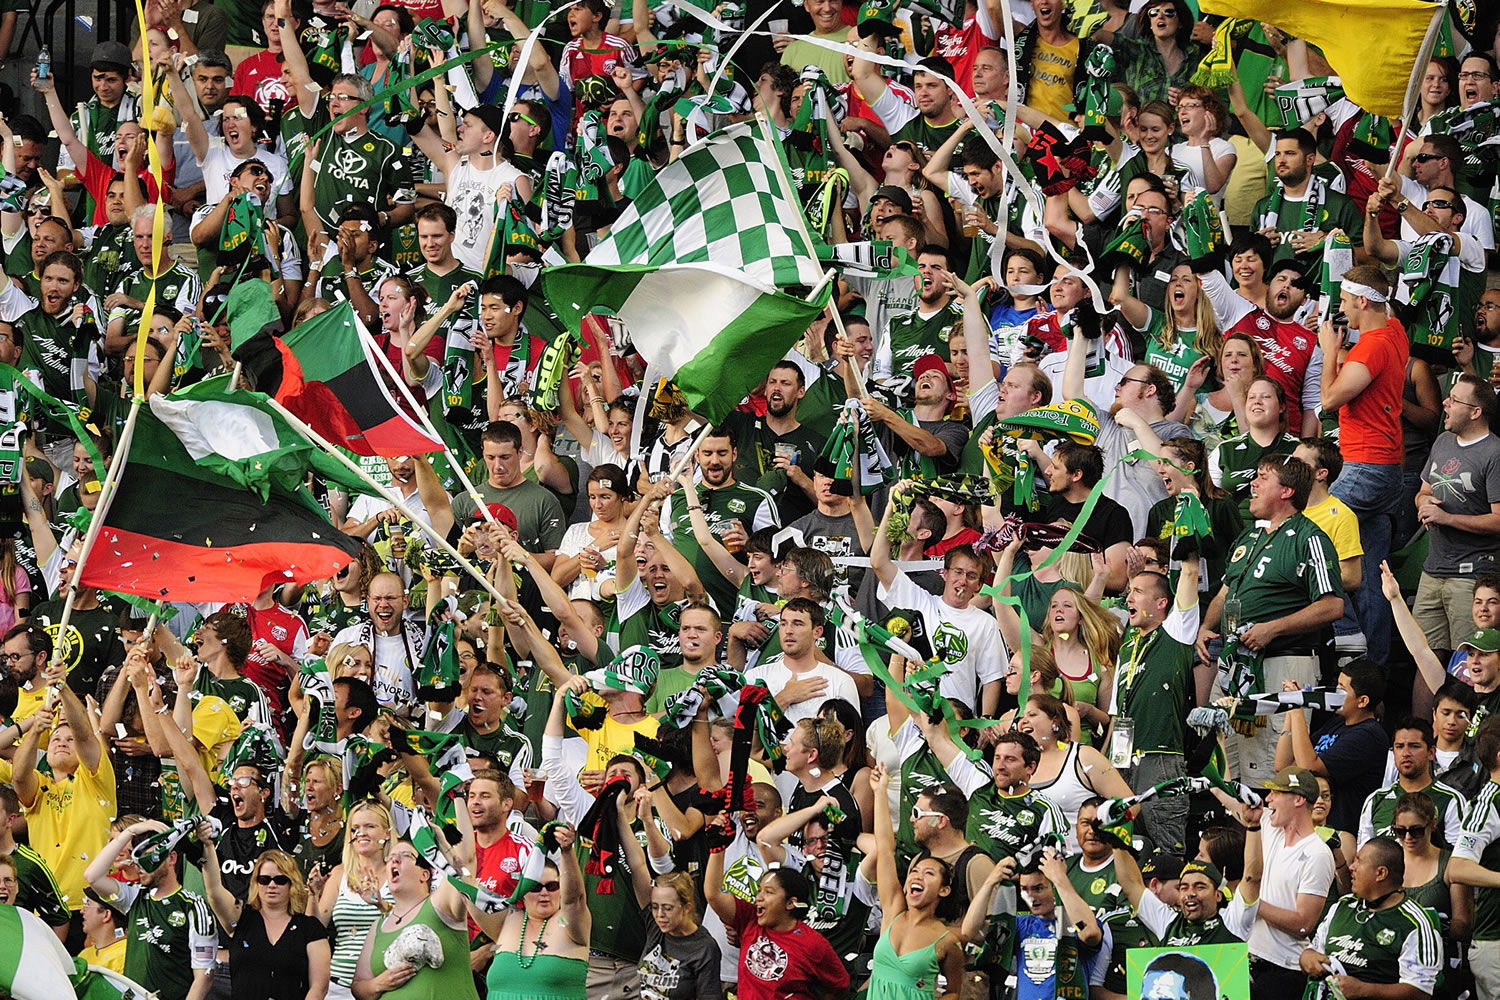 Portland Timbers fans cheer before the start of a game against the Los Angeles Galaxy at Jeld-Wen Field Wednesday August 3, 2011 in Portland, Oregon.